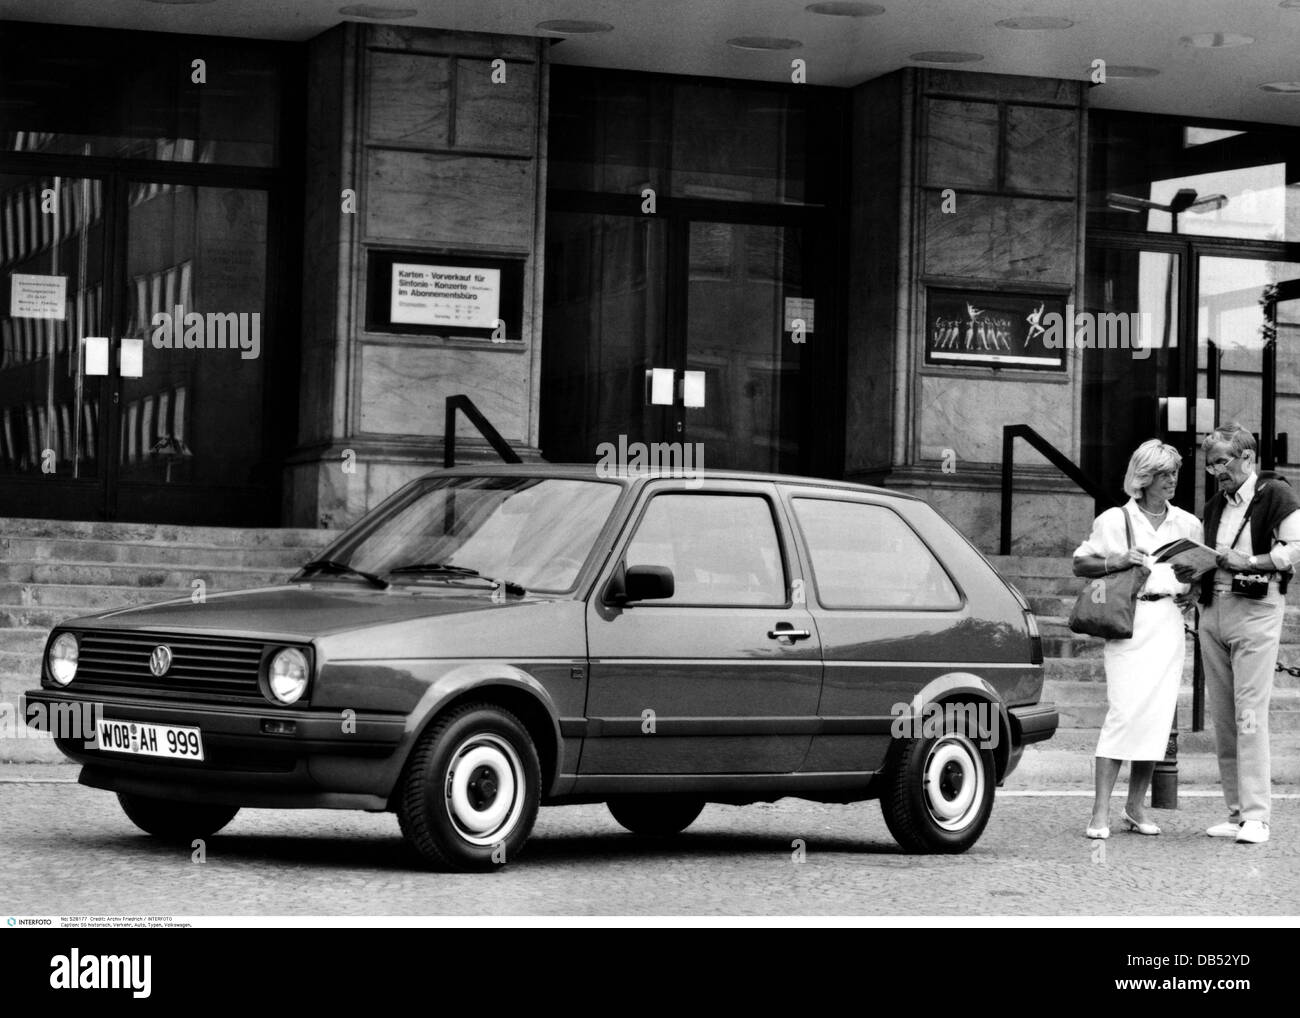 transport / transportation, car, vehicle variants, Volkswagen, Golf II, basic model, (1983 - 1991), limousine, exterior view, 20th century, historic, historical, outside, VW, motor car, auto, automobile, passenger car, motor cars, autos, automobiles, passenger cars, small car, people, 1980s, Additional-Rights-Clearences-Not Available Stock Photo